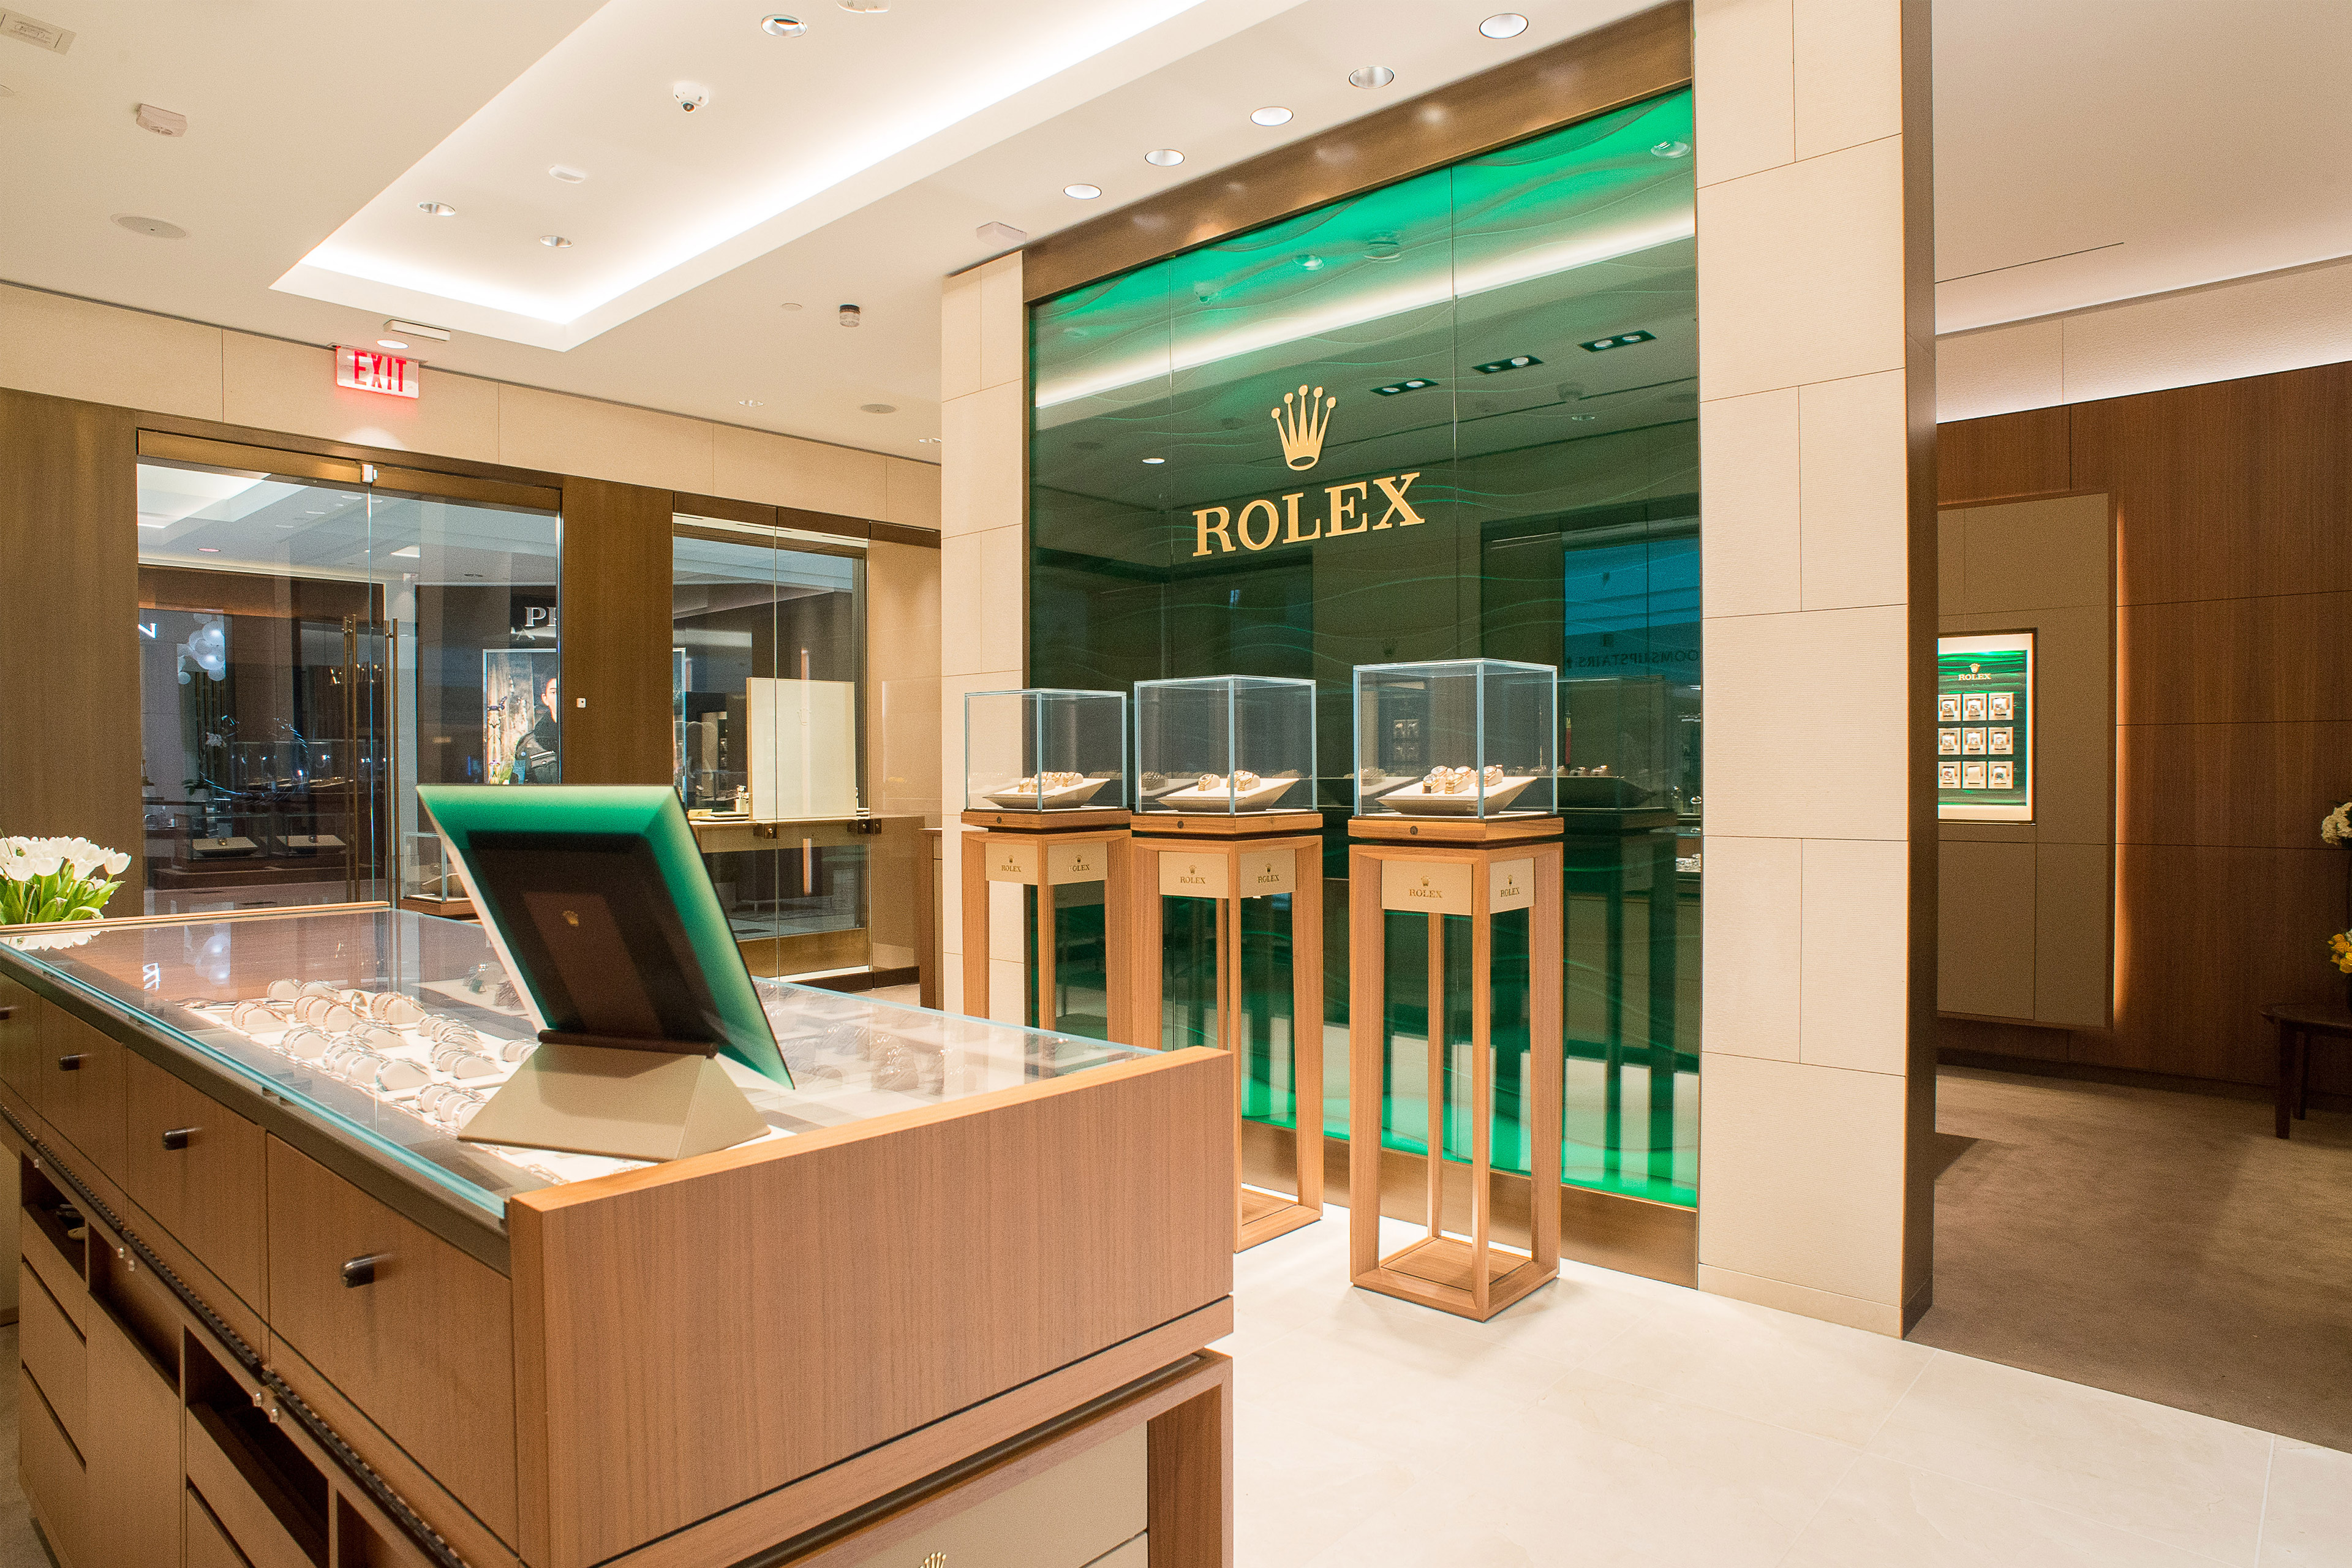 Mayors opens first flagship in Atlanta at Lenox Square as part of the  retailer's relaunch - News & Media - The Watches of Switzerland Group